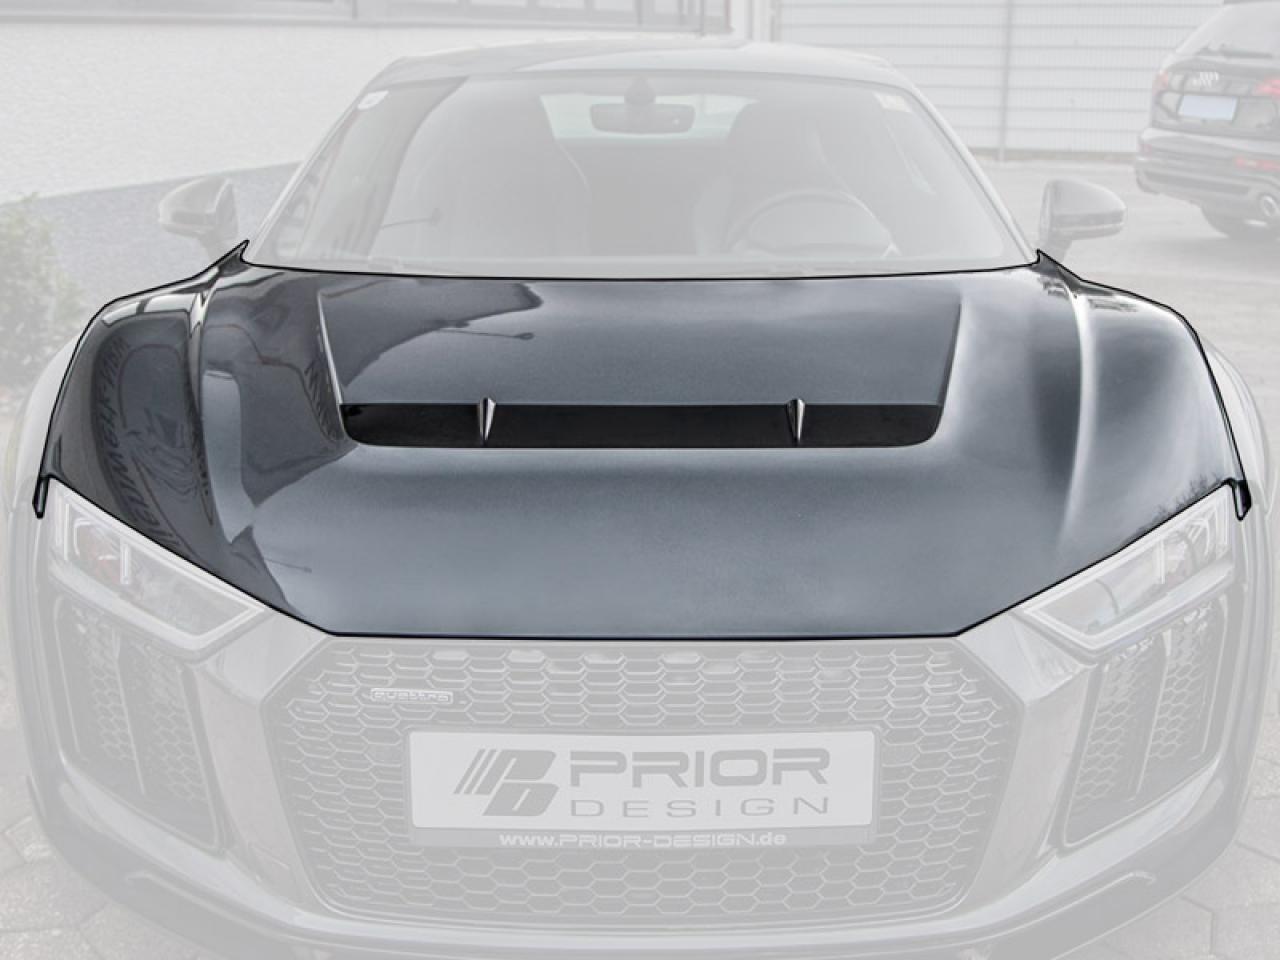 PD800WB Bonnet with Air Intake for Audi R8 4S Coupe/Spyder [2015+]